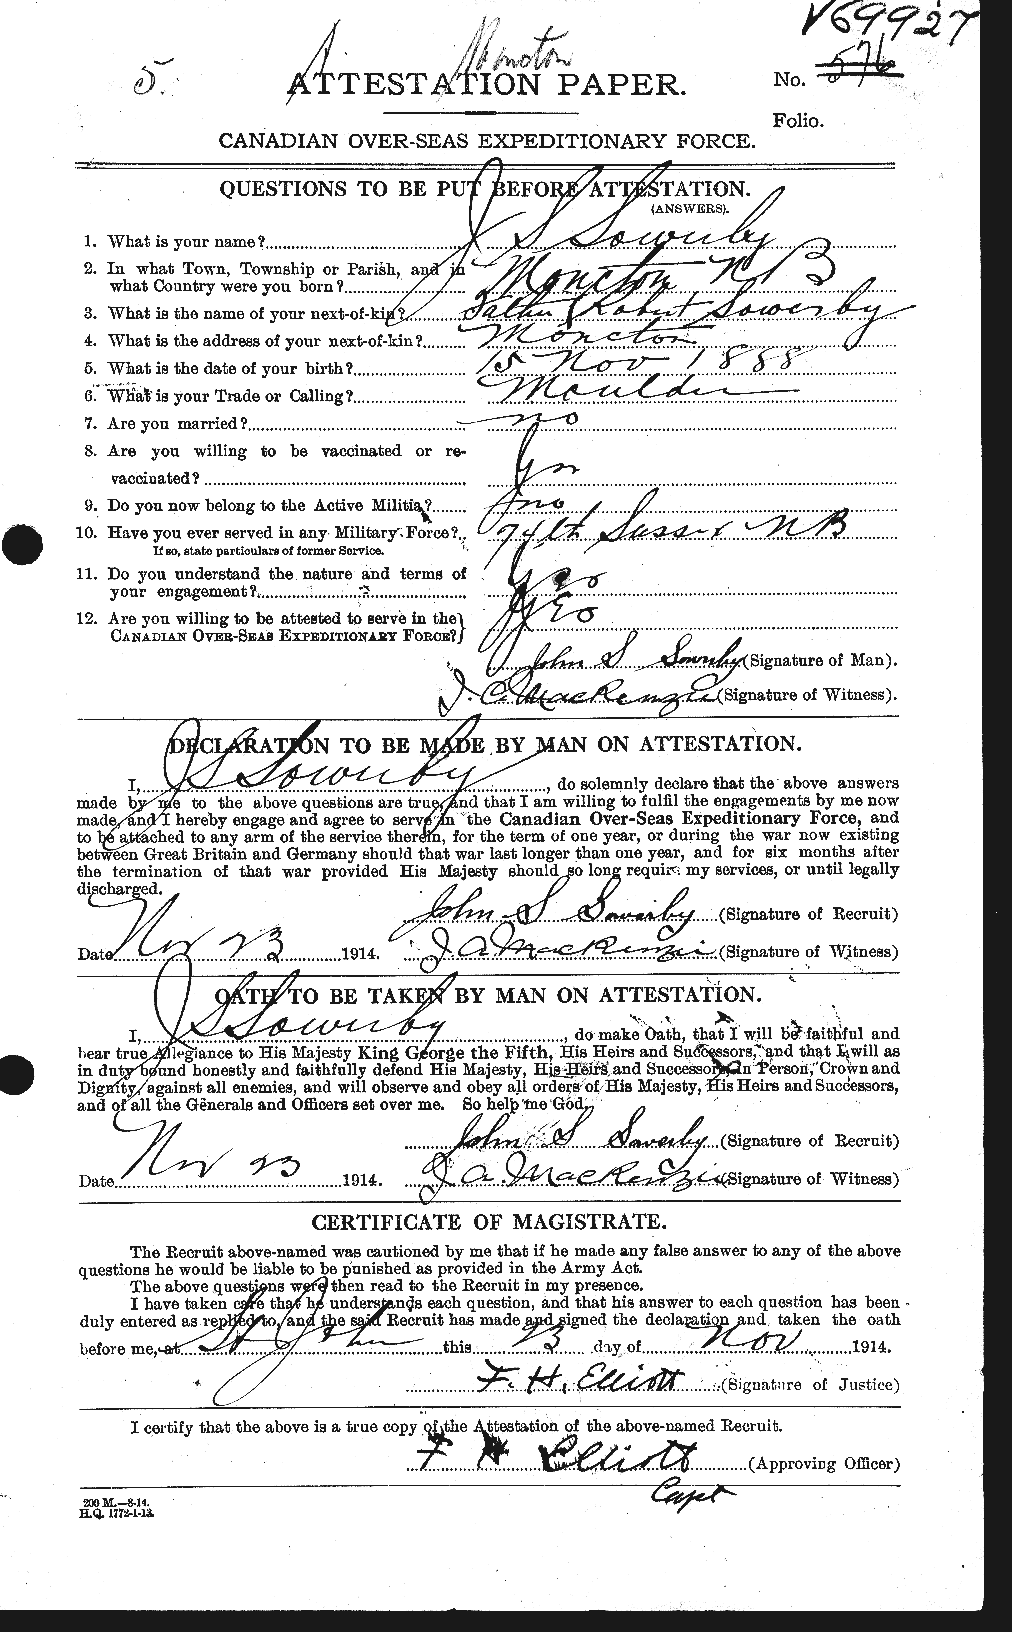 Personnel Records of the First World War - CEF 624397a